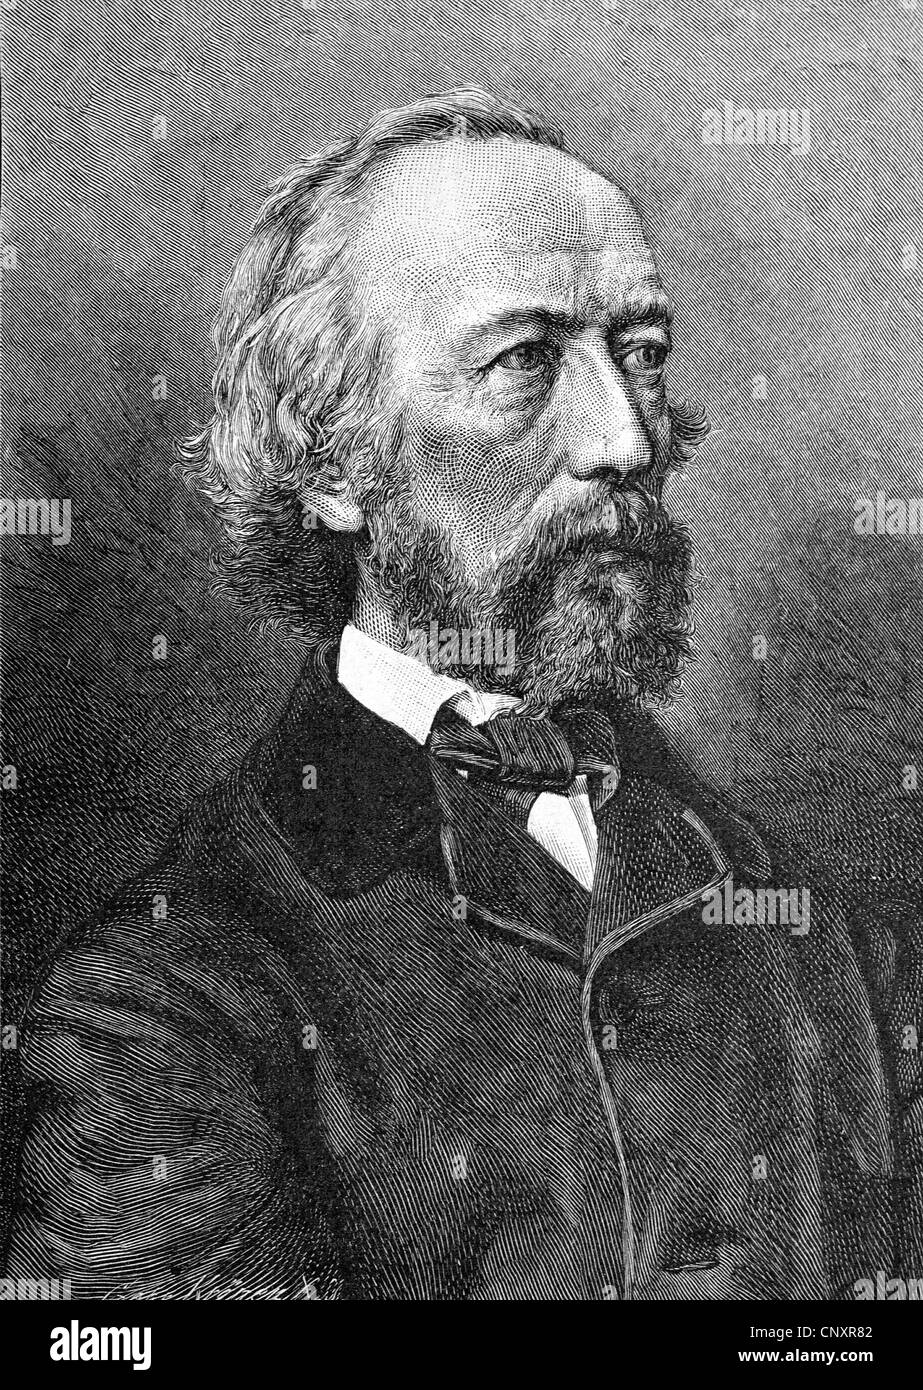 Klaus Groth, 1819 - 1899, one of the most famous Low German poets and writers, historical engraving, about 1888 Stock Photo